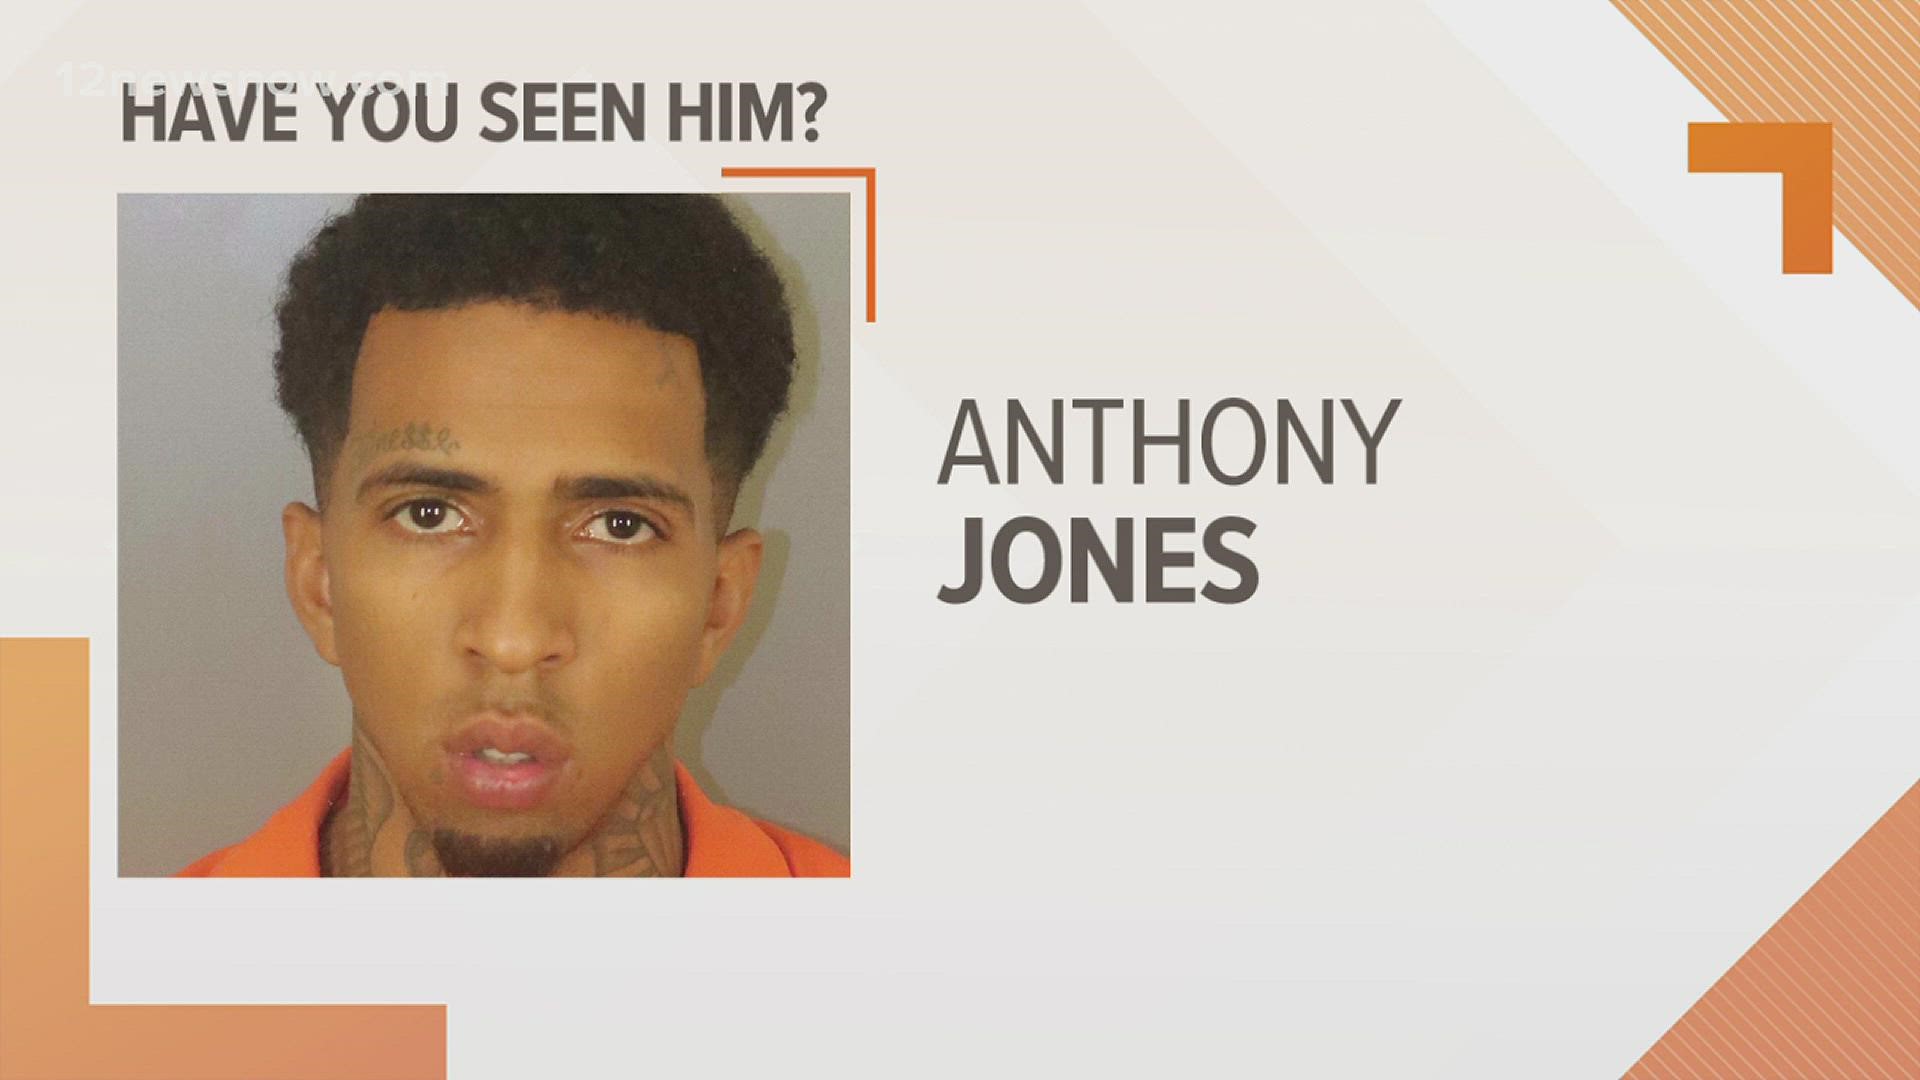 Anyone with information that could lead to locating Jones is asked to contact the Port Arthur Police Department or Crime Ttoppers by calling 833-8477.